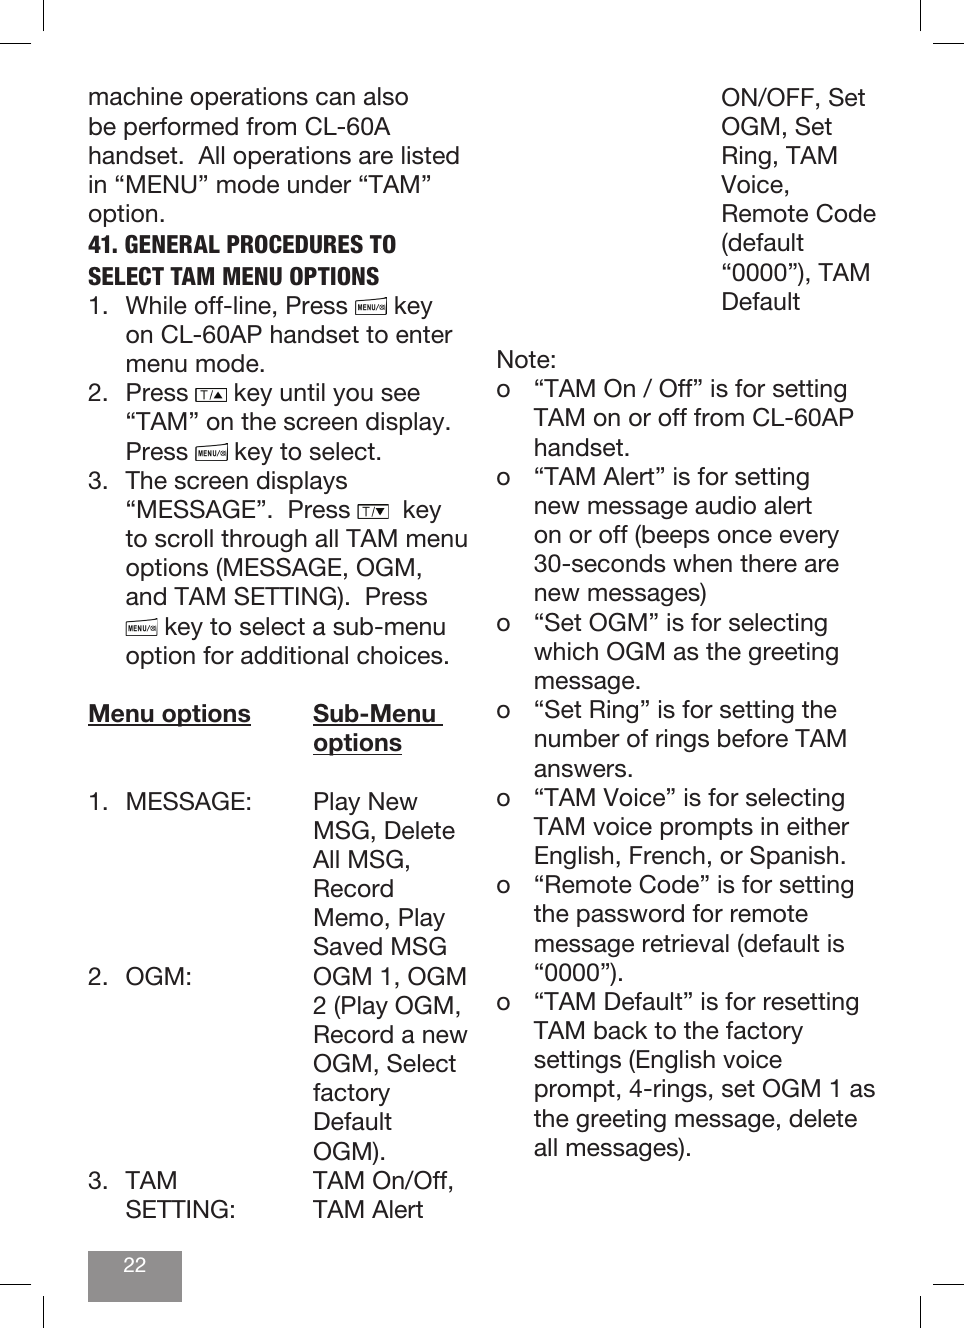 22machine operations can also be performed from CL-60A handset.  All operations are listed in “MENU” mode under “TAM” option.  41. GENERAL PROCEDURES TO SELECT TAM MENU OPTIONS1.  While off-line, Press   key on CL-60AP handset to enter menu mode.   2. Press   key until you see “TAM” on the screen display.  Press   key to select.3.  The screen displays “MESSAGE”.  Press    key to scroll through all TAM menu options (MESSAGE, OGM, and TAM SETTING).  Press  key to select a sub-menu option for additional choices.Menu options Sub-Menu       options1.  MESSAGE:    Play New      MSG, Delete       All MSG,       Record       Memo, Play       Saved MSG2.  OGM:      OGM 1, OGM         2 (Play OGM,         Record a new       OGM, Select       factory       Default       OGM).3.  TAM    TAM On/Off,   SETTING:   TAM  Alert       ON/OFF, Set       OGM, Set       Ring, TAM       Voice,       Remote Code       (default       “0000”), TAM       DefaultNote:  o  “TAM On / Off” is for setting TAM on or off from CL-60AP handset.o  “TAM Alert” is for setting new message audio alert on or off (beeps once every 30-seconds when there are new messages)o  “Set OGM” is for selecting which OGM as the greeting message.o  “Set Ring” is for setting the number of rings before TAM answers.o  “TAM Voice” is for selecting TAM voice prompts in either English, French, or Spanish.o  “Remote Code” is for setting the password for remote message retrieval (default is “0000”).o  “TAM Default” is for resetting TAM back to the factory settings (English voice prompt, 4-rings, set OGM 1 as the greeting message, delete all messages).